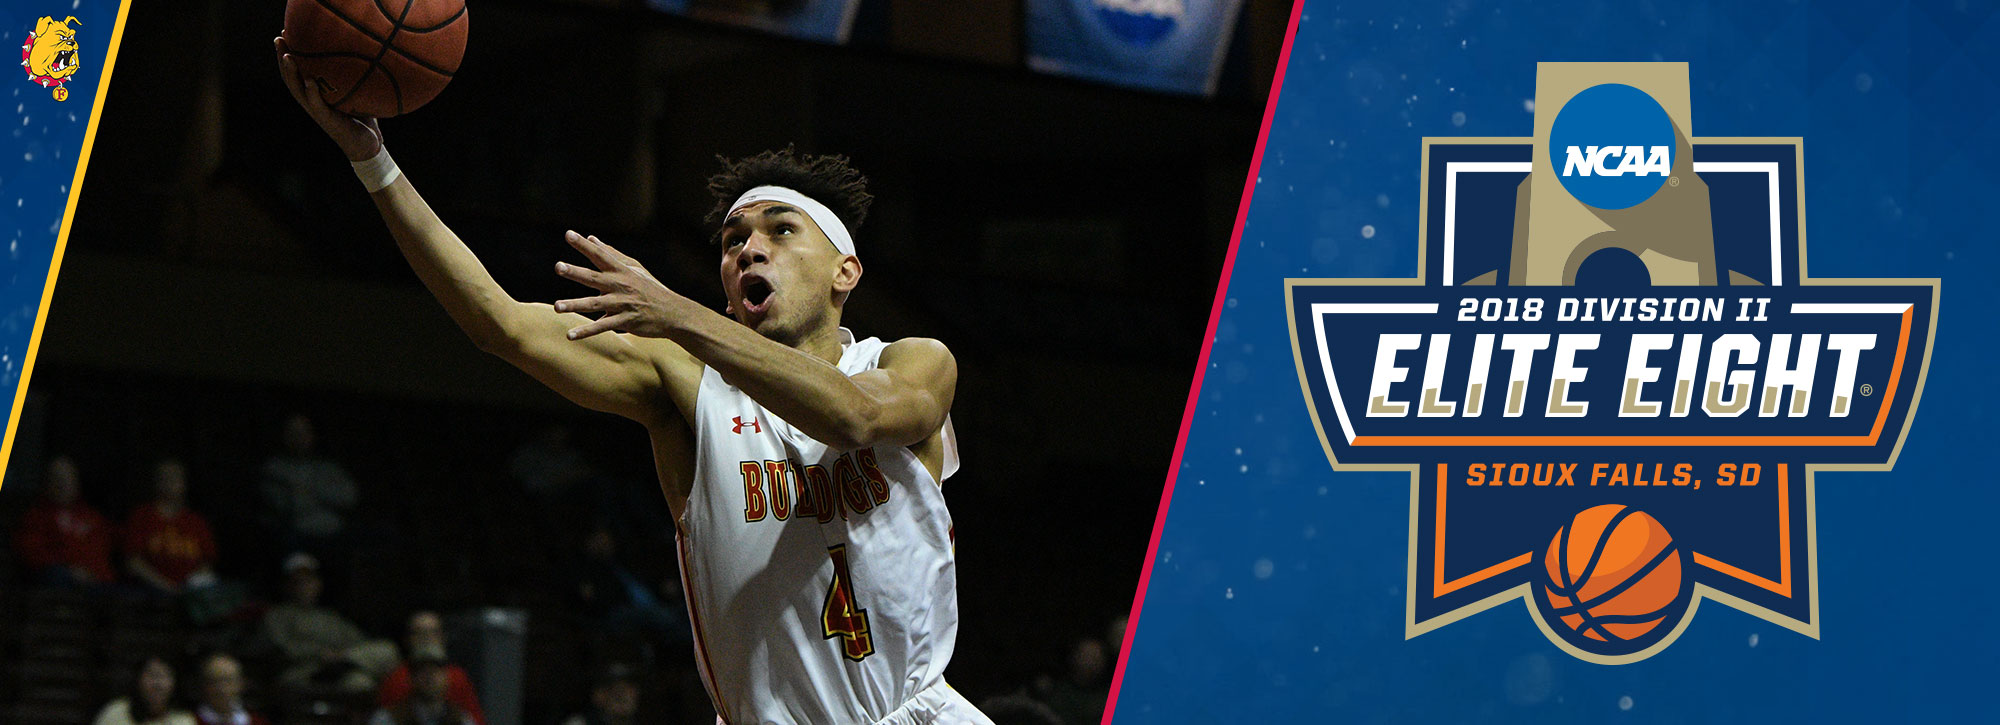 Ferris State Survives Barry 87-84 in #EliteEight; Advance to Play West Texas A&M in Semis